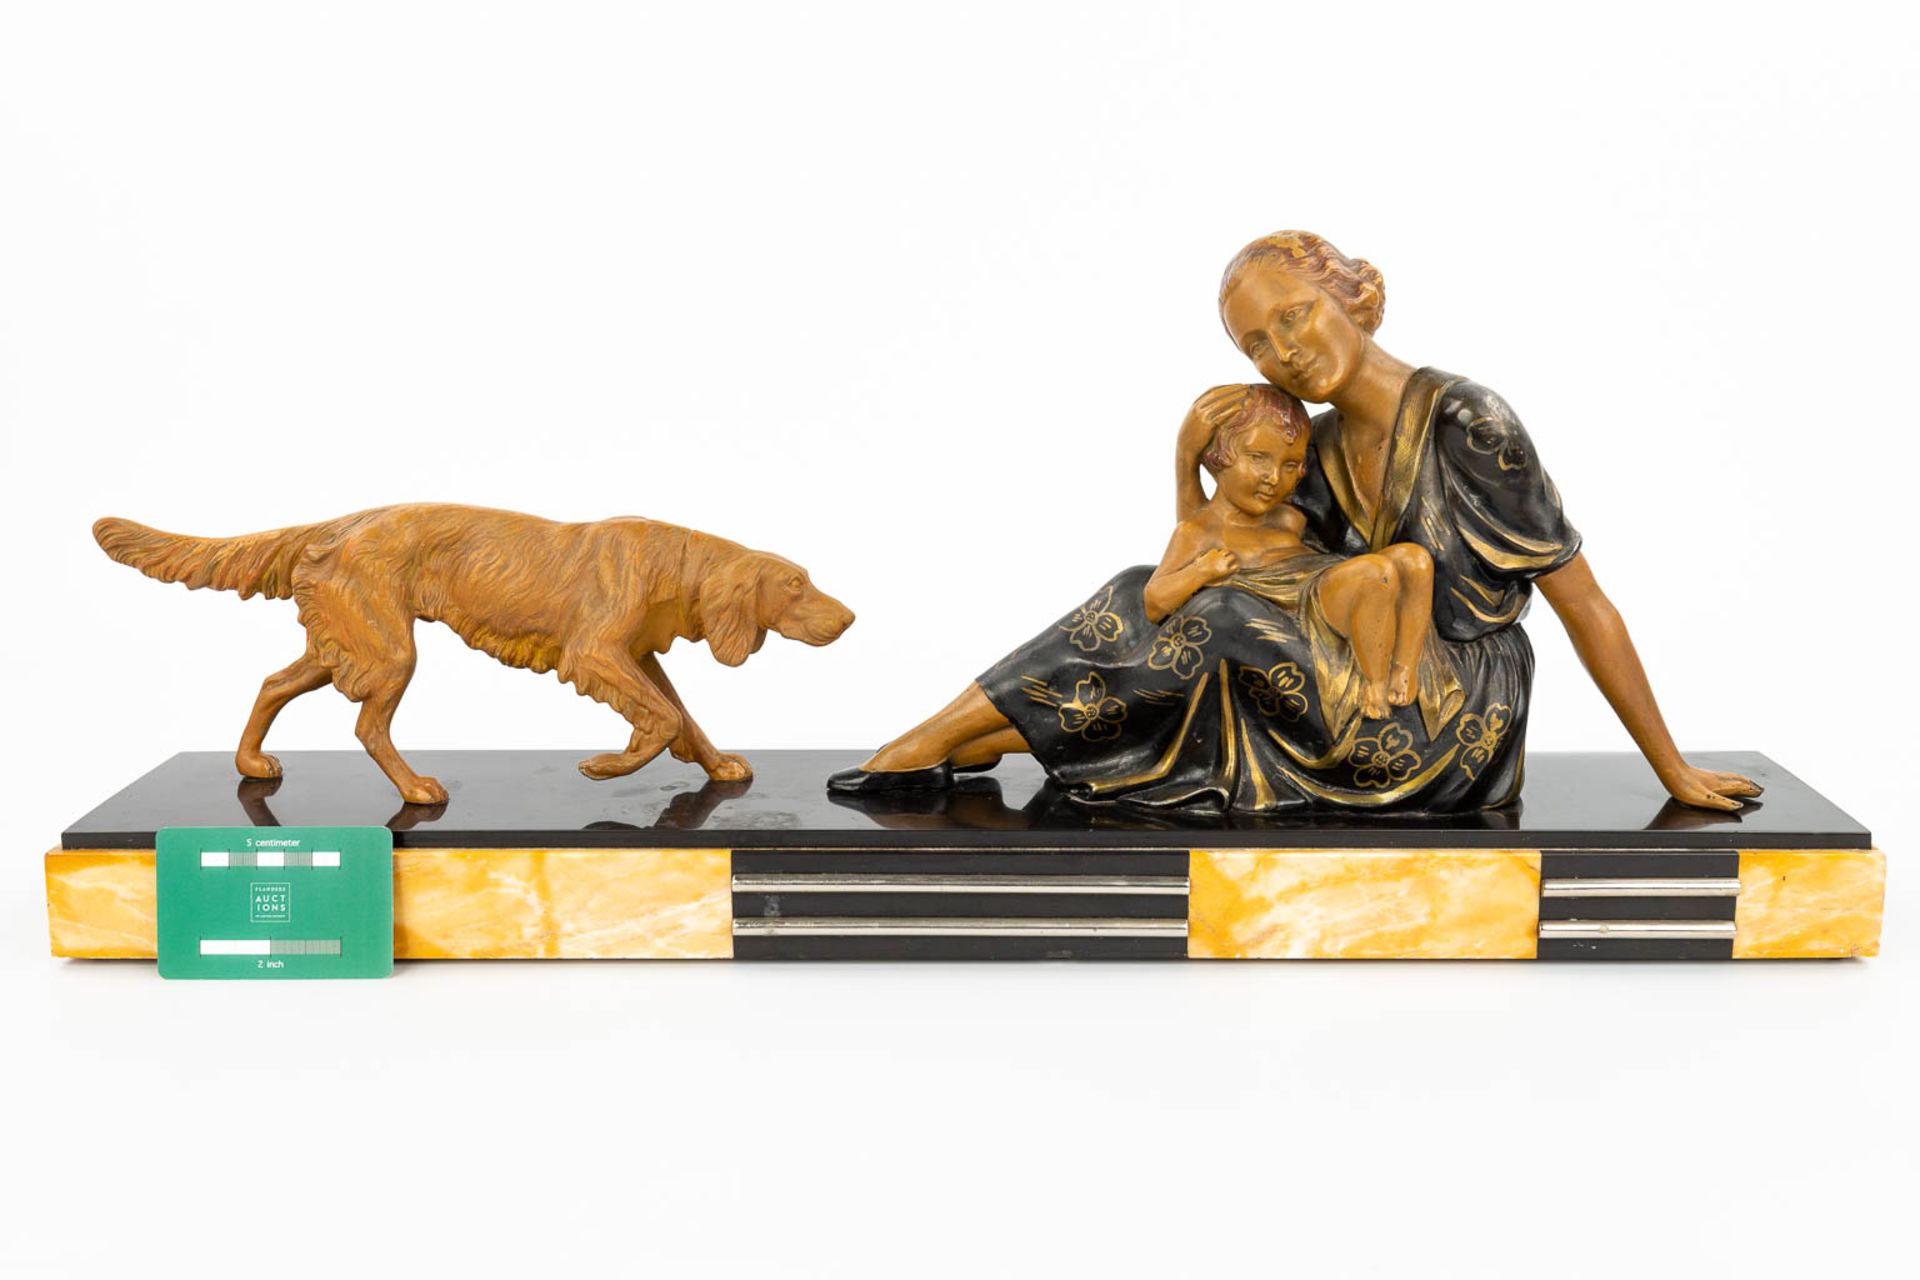 An art deco style statue of a woman with child and her dog, made of spelter and mounted on a marble - Image 7 of 12